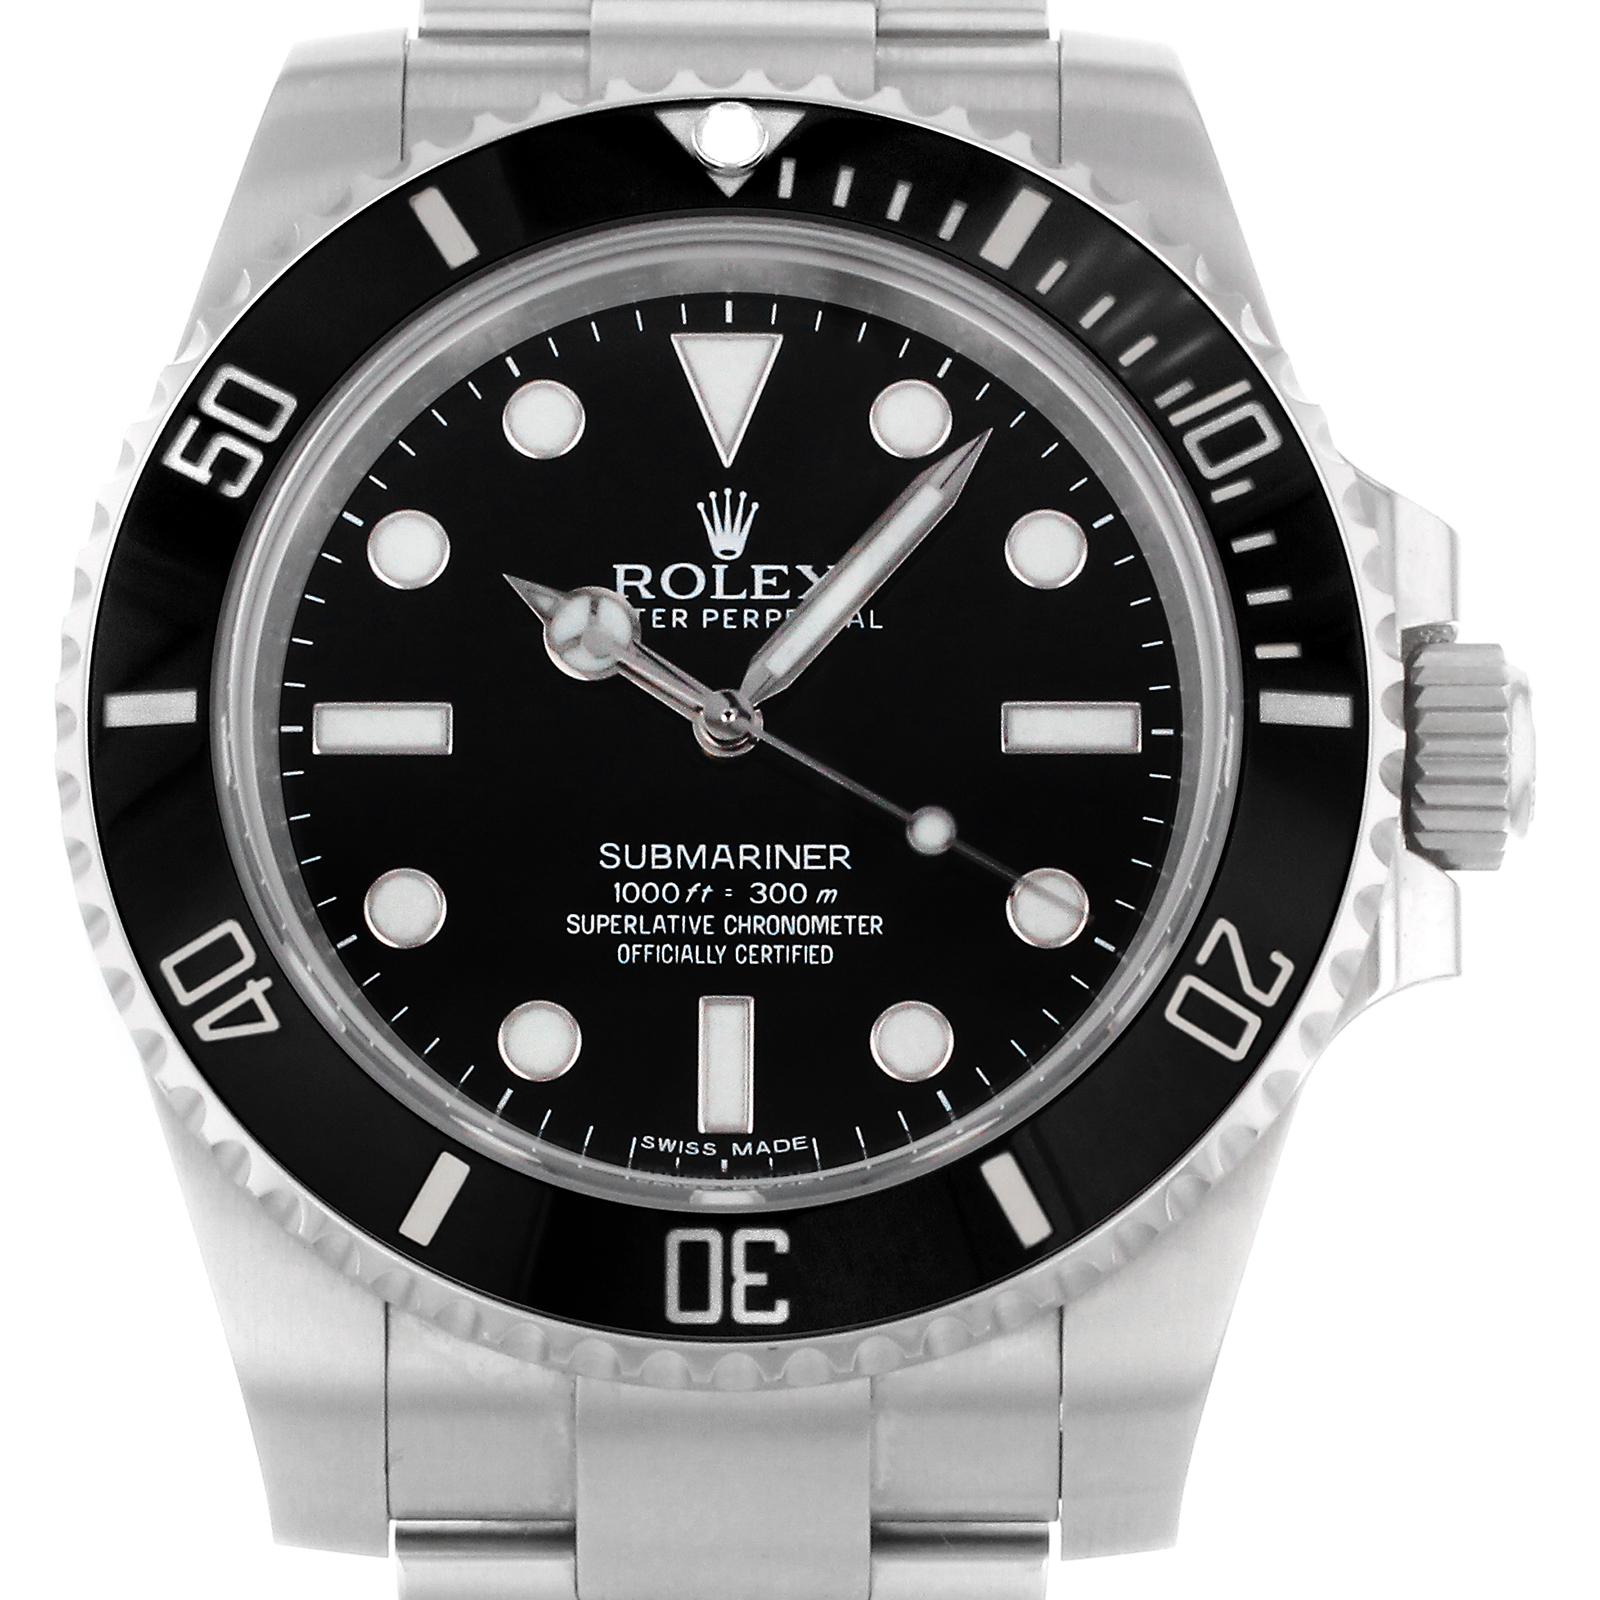 Rolex Submariner No Date Stainless Steel Black Dial Automatic Men's Watch 114060 1